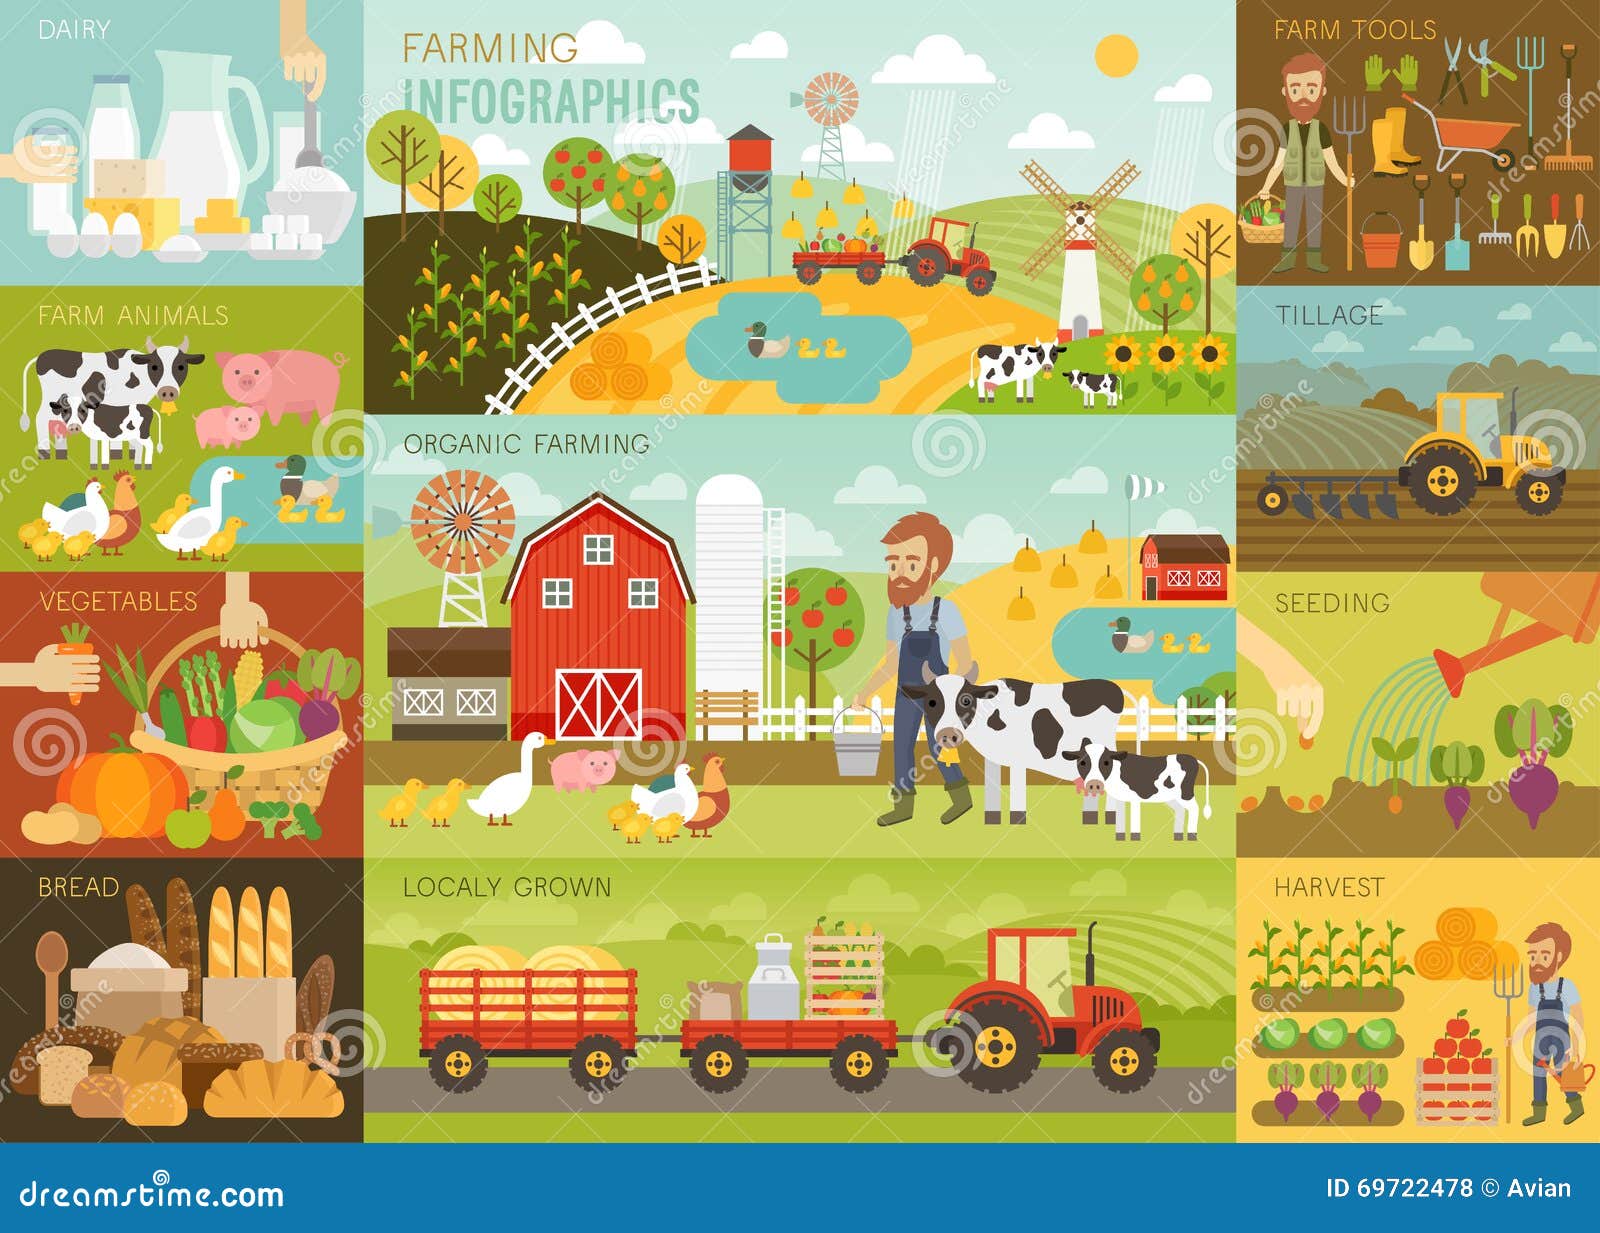 farming infographic set with animals, equipment and other objects.